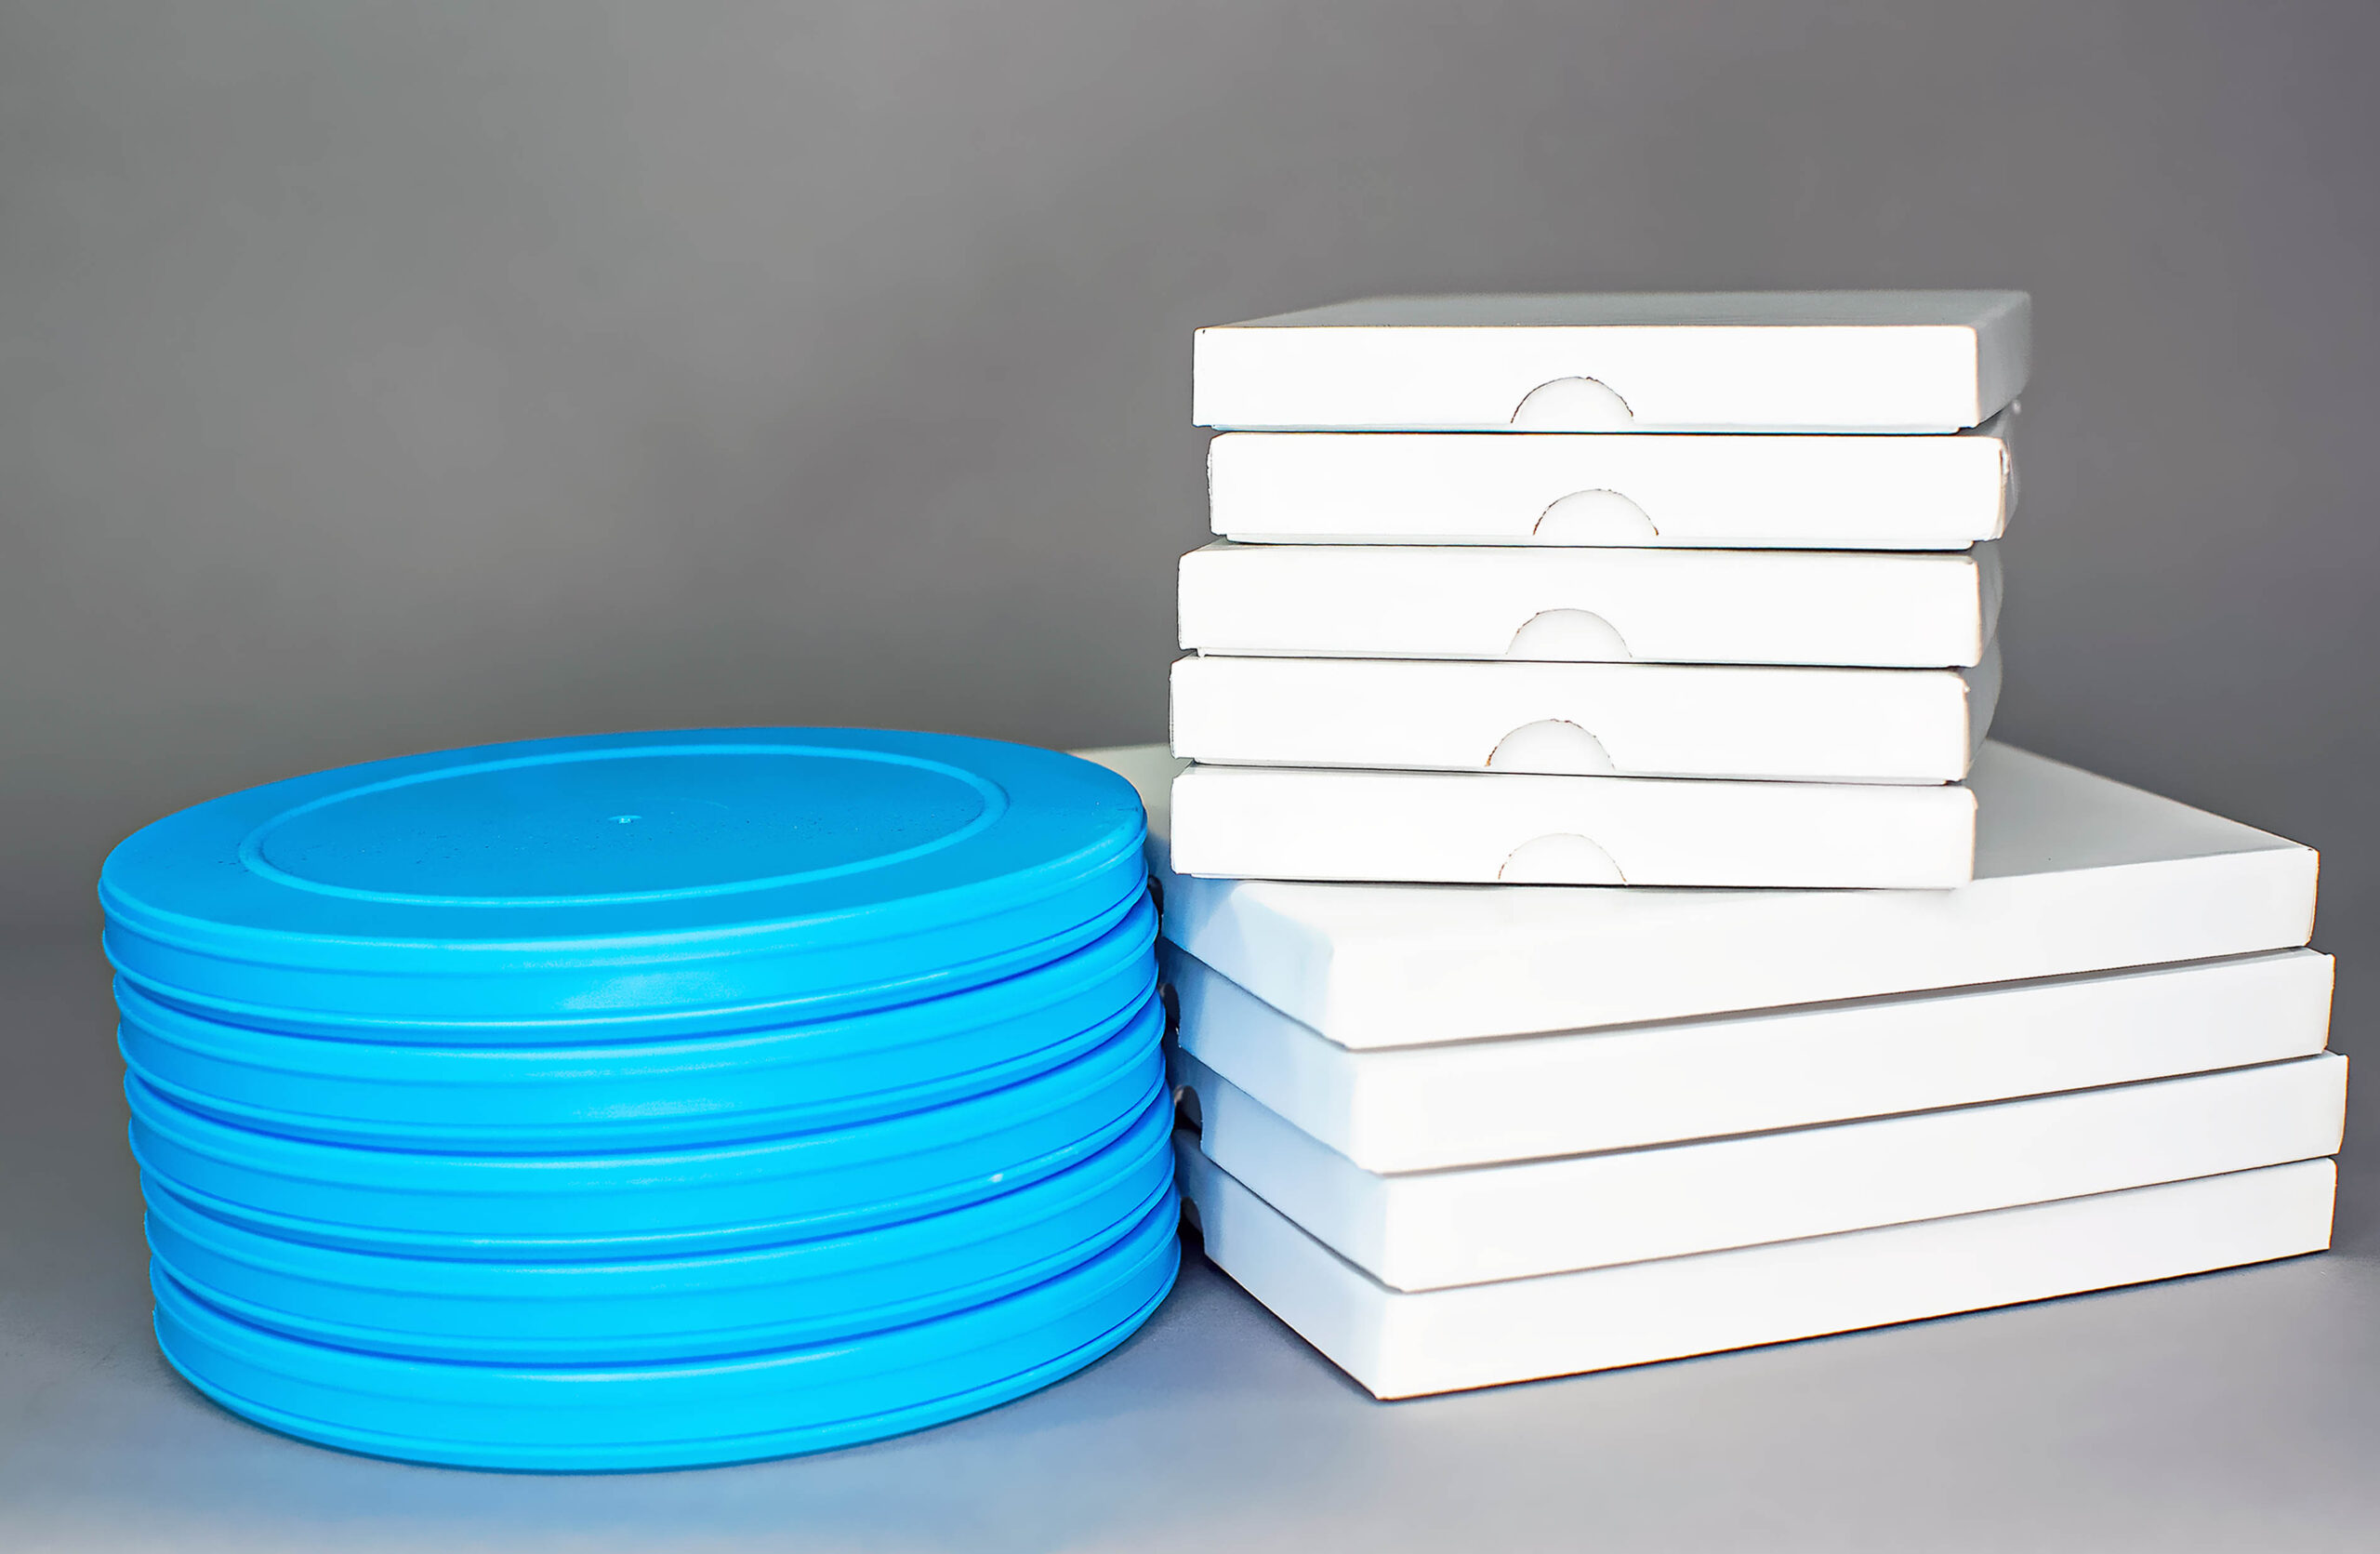 8mm Generic Film Storage Containers